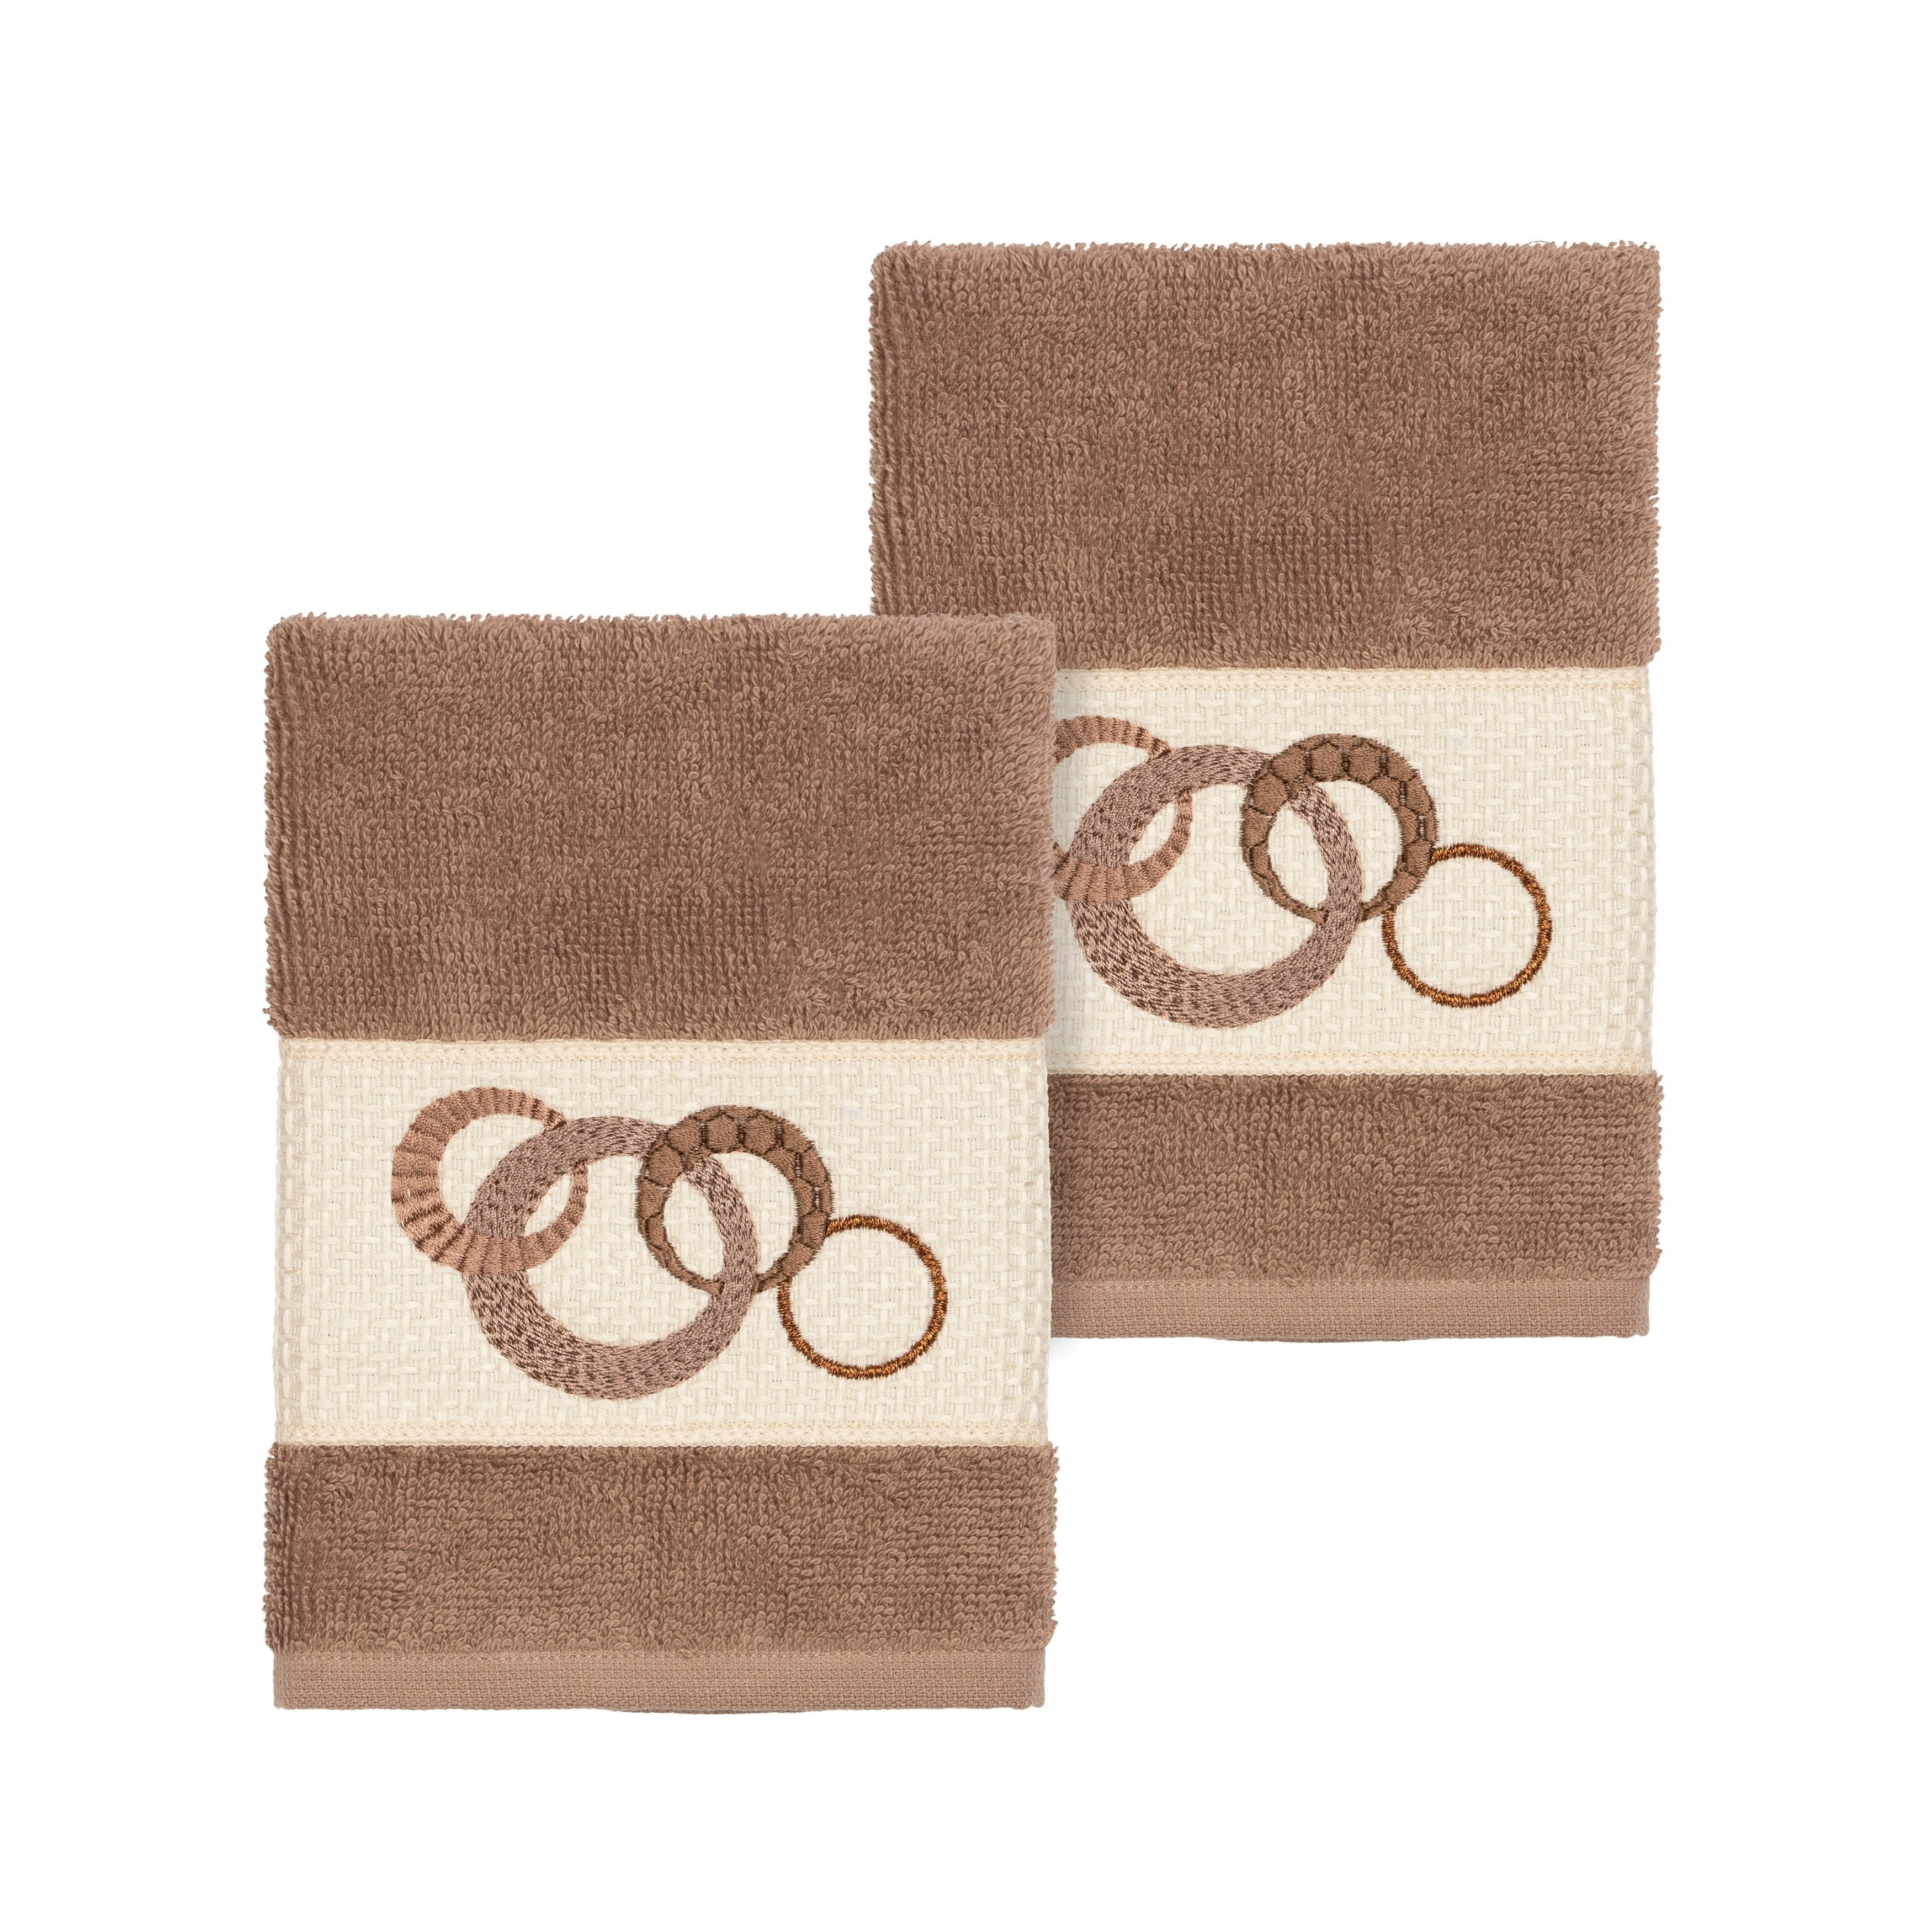 https://ak1.ostkcdn.com/images/products/22160776/Authentic-Hotel-and-Spa-Turkish-Cotton-Circles-Embroidered-Latte-Brown-2-piece-Washcloth-Set-8584a79f-053d-4b43-9061-50538a3f9afa.jpg